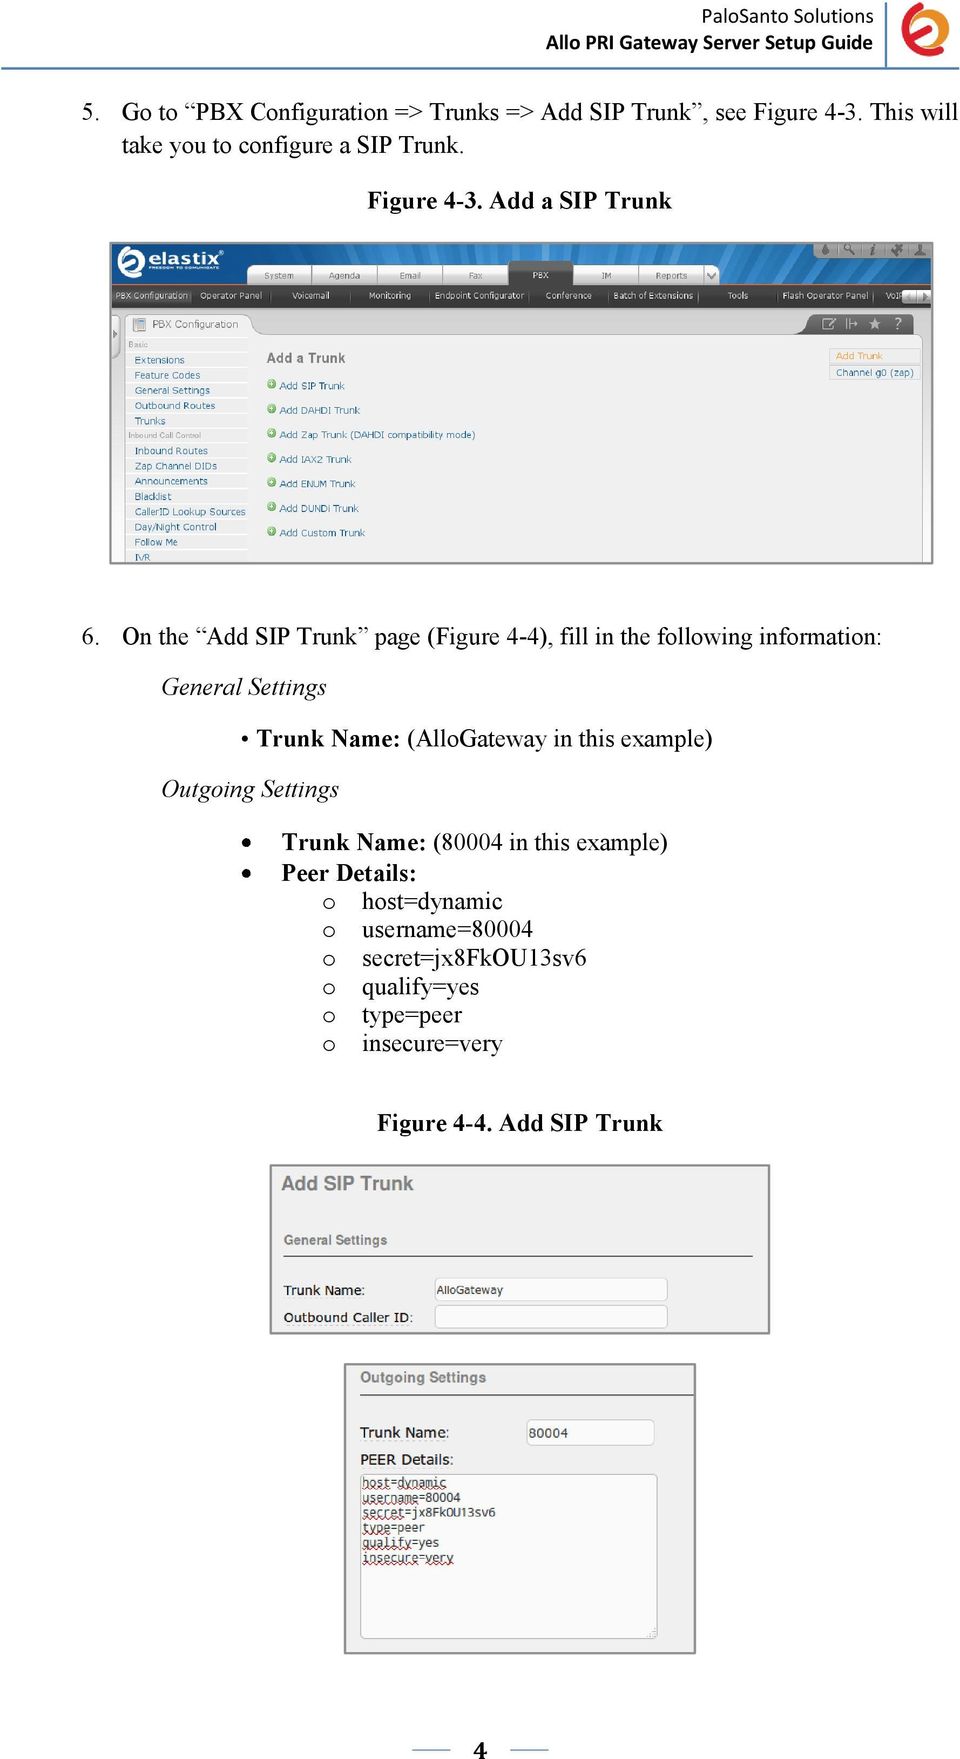 On the Add SIP Trunk page (Figure 4-4), fill in the following information: General Settings Trunk Name: (AlloGateway